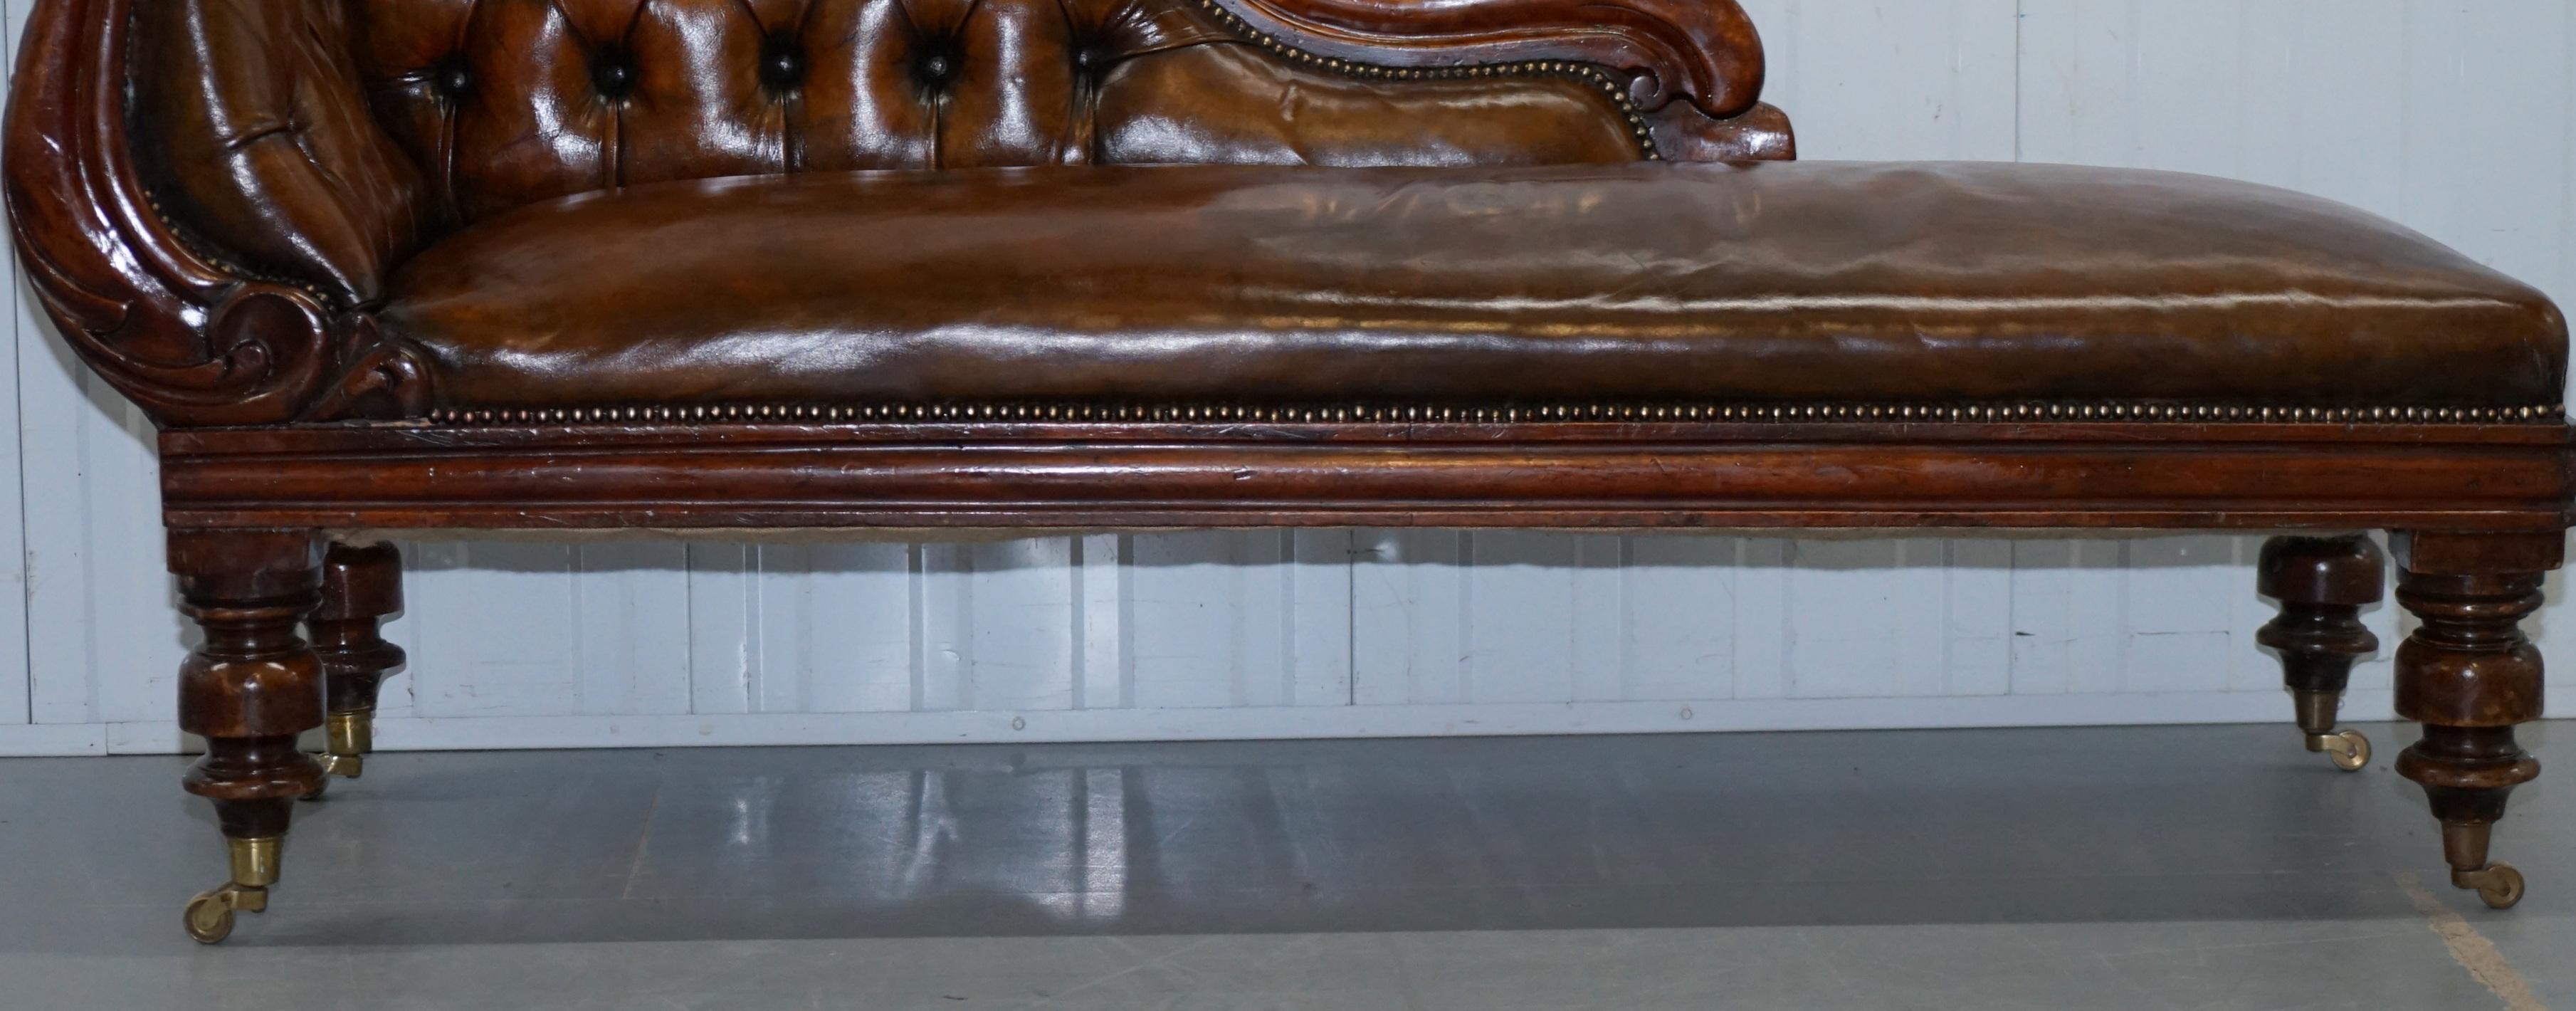 Stunning Restored Victorian Chesterfield Aged Brown Leather Chaise Longue Daybed 1